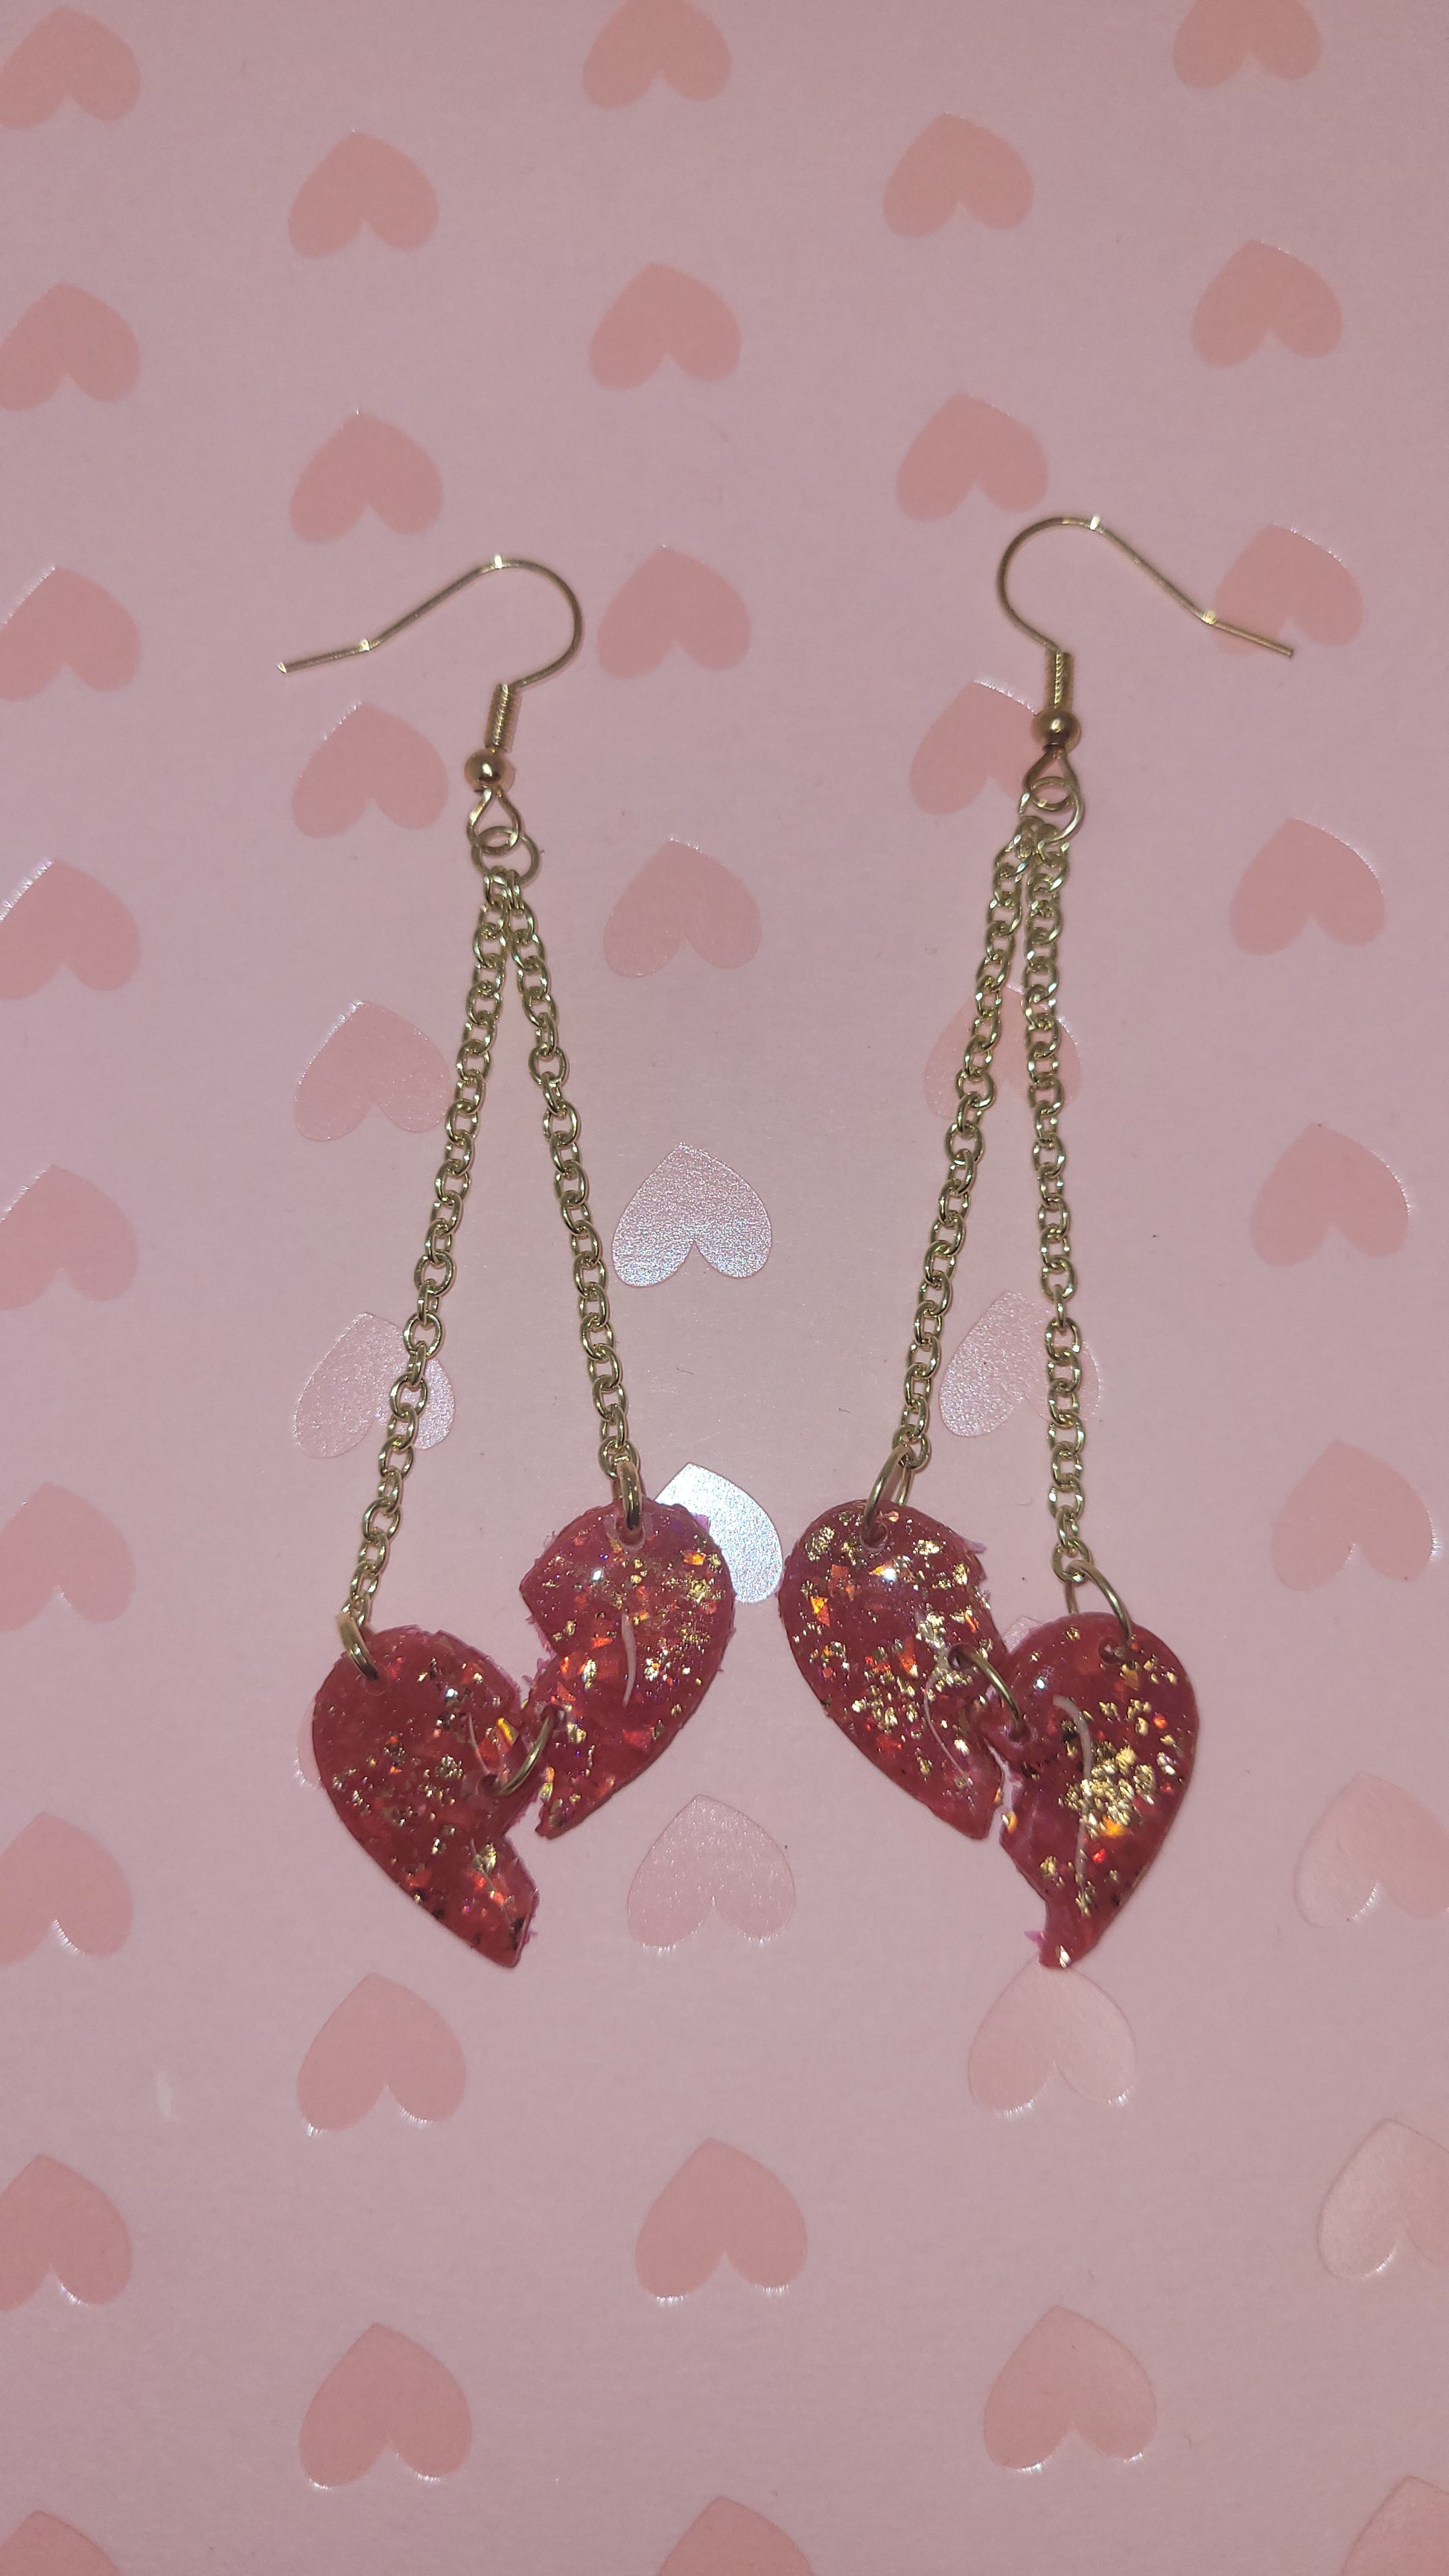 heartbreak dangles laid on a pink heart background (with flash)